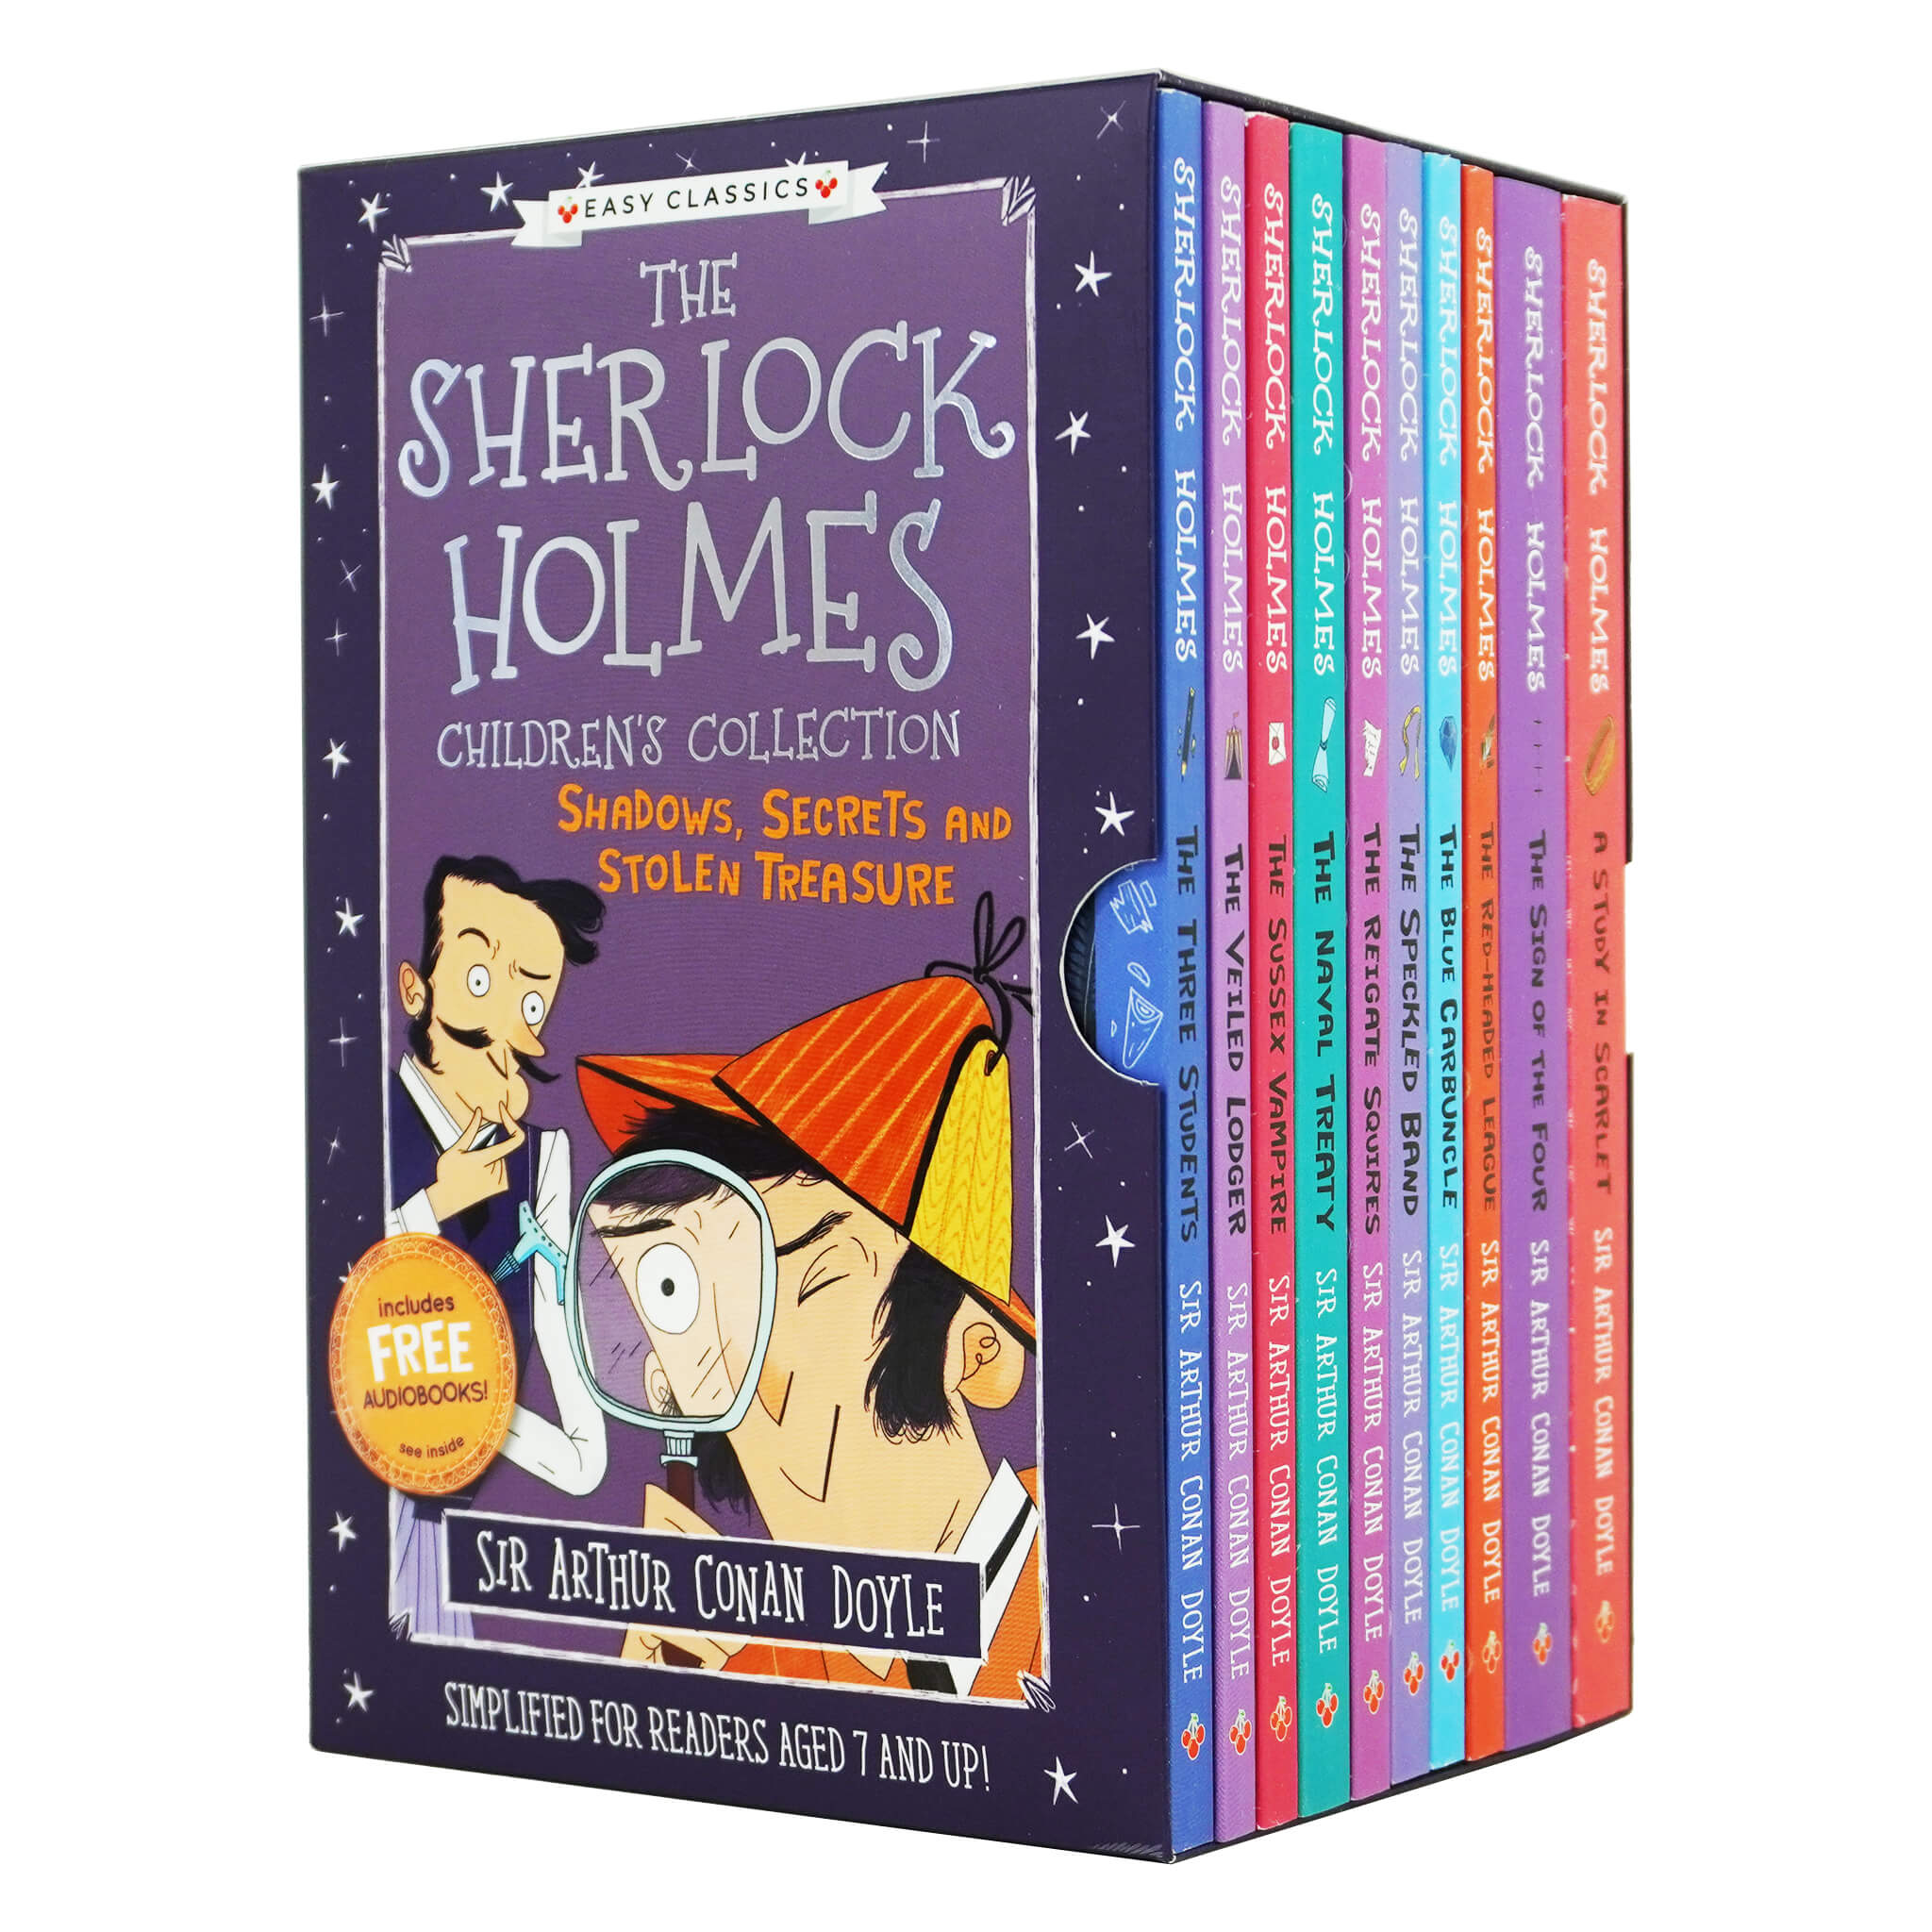 The Sherlock Holmes Children's Collection: Shadows, Secrets and Stolen Treasure 10 Books (Series 1) by Sir Arthur Conan Doyle - Ages 7-9 - Paperback